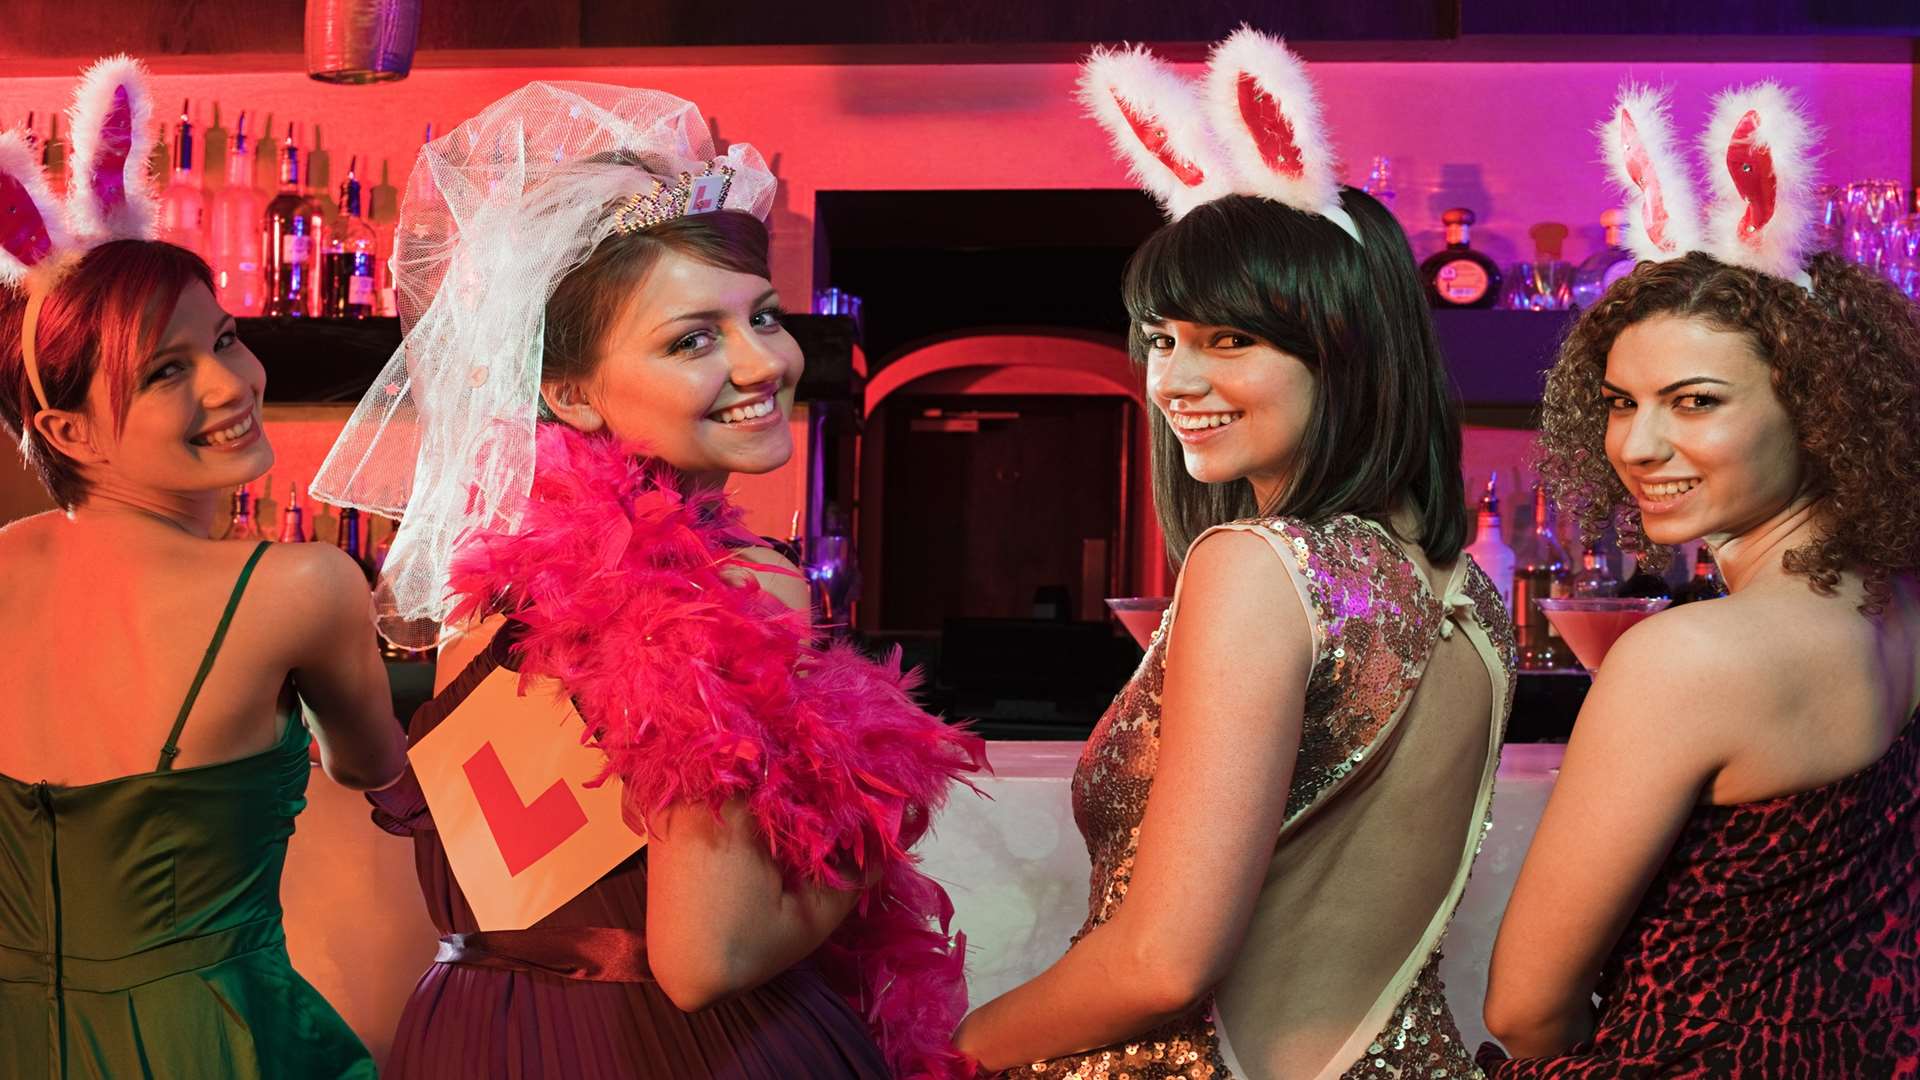 Have a chat with the bride to find out what sort of hen weekend she envisages.